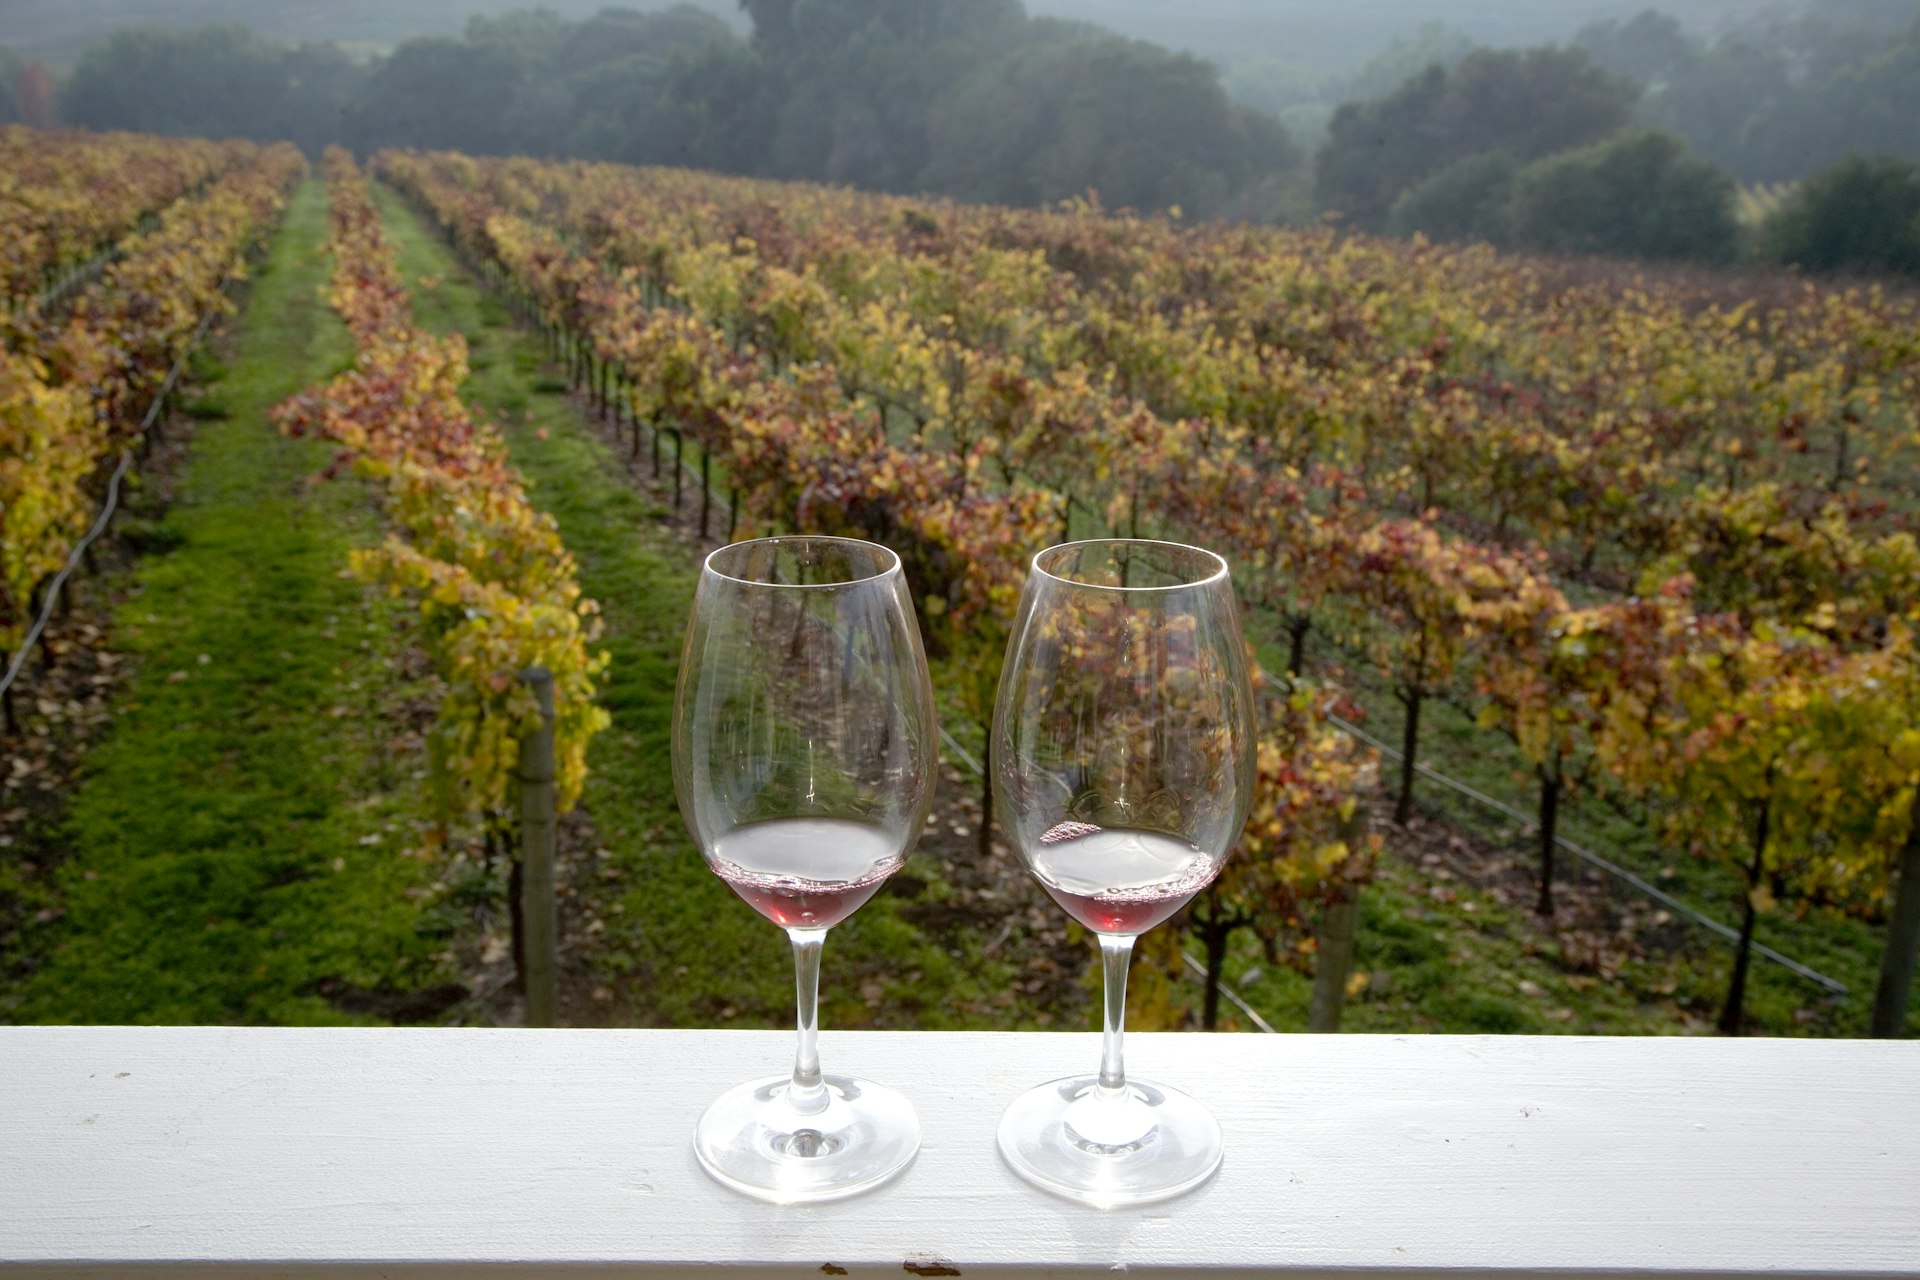 Two glasses of wine sit in the foreground overlooking rows of vinyards in Napa Valley, California